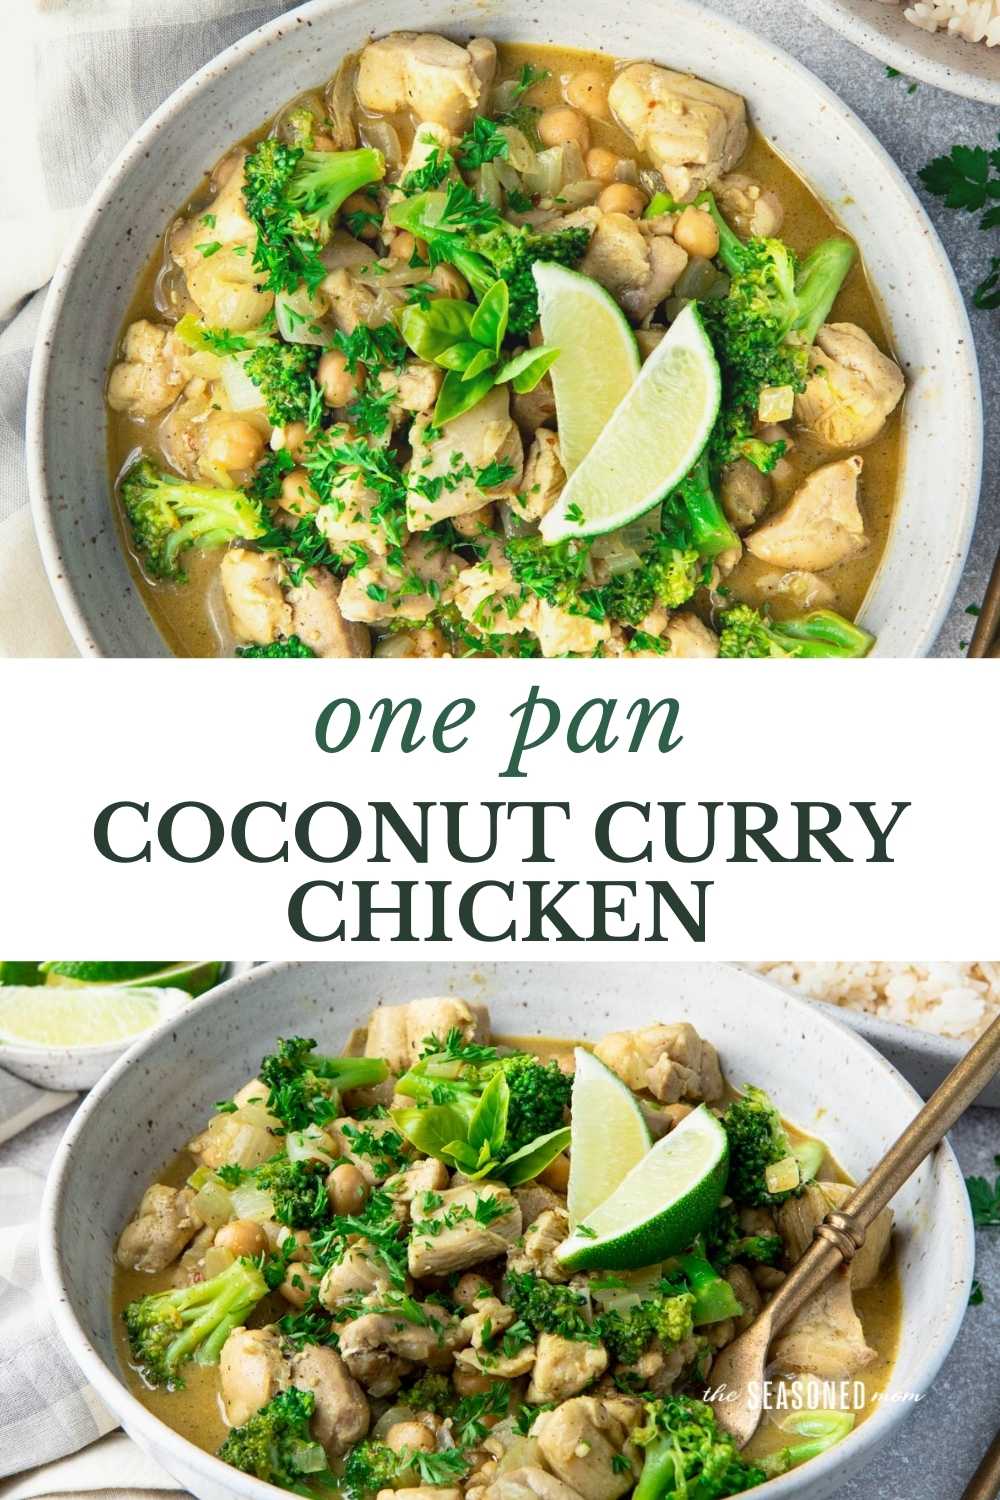 One Pan Coconut Curry Chicken - The Seasoned Mom